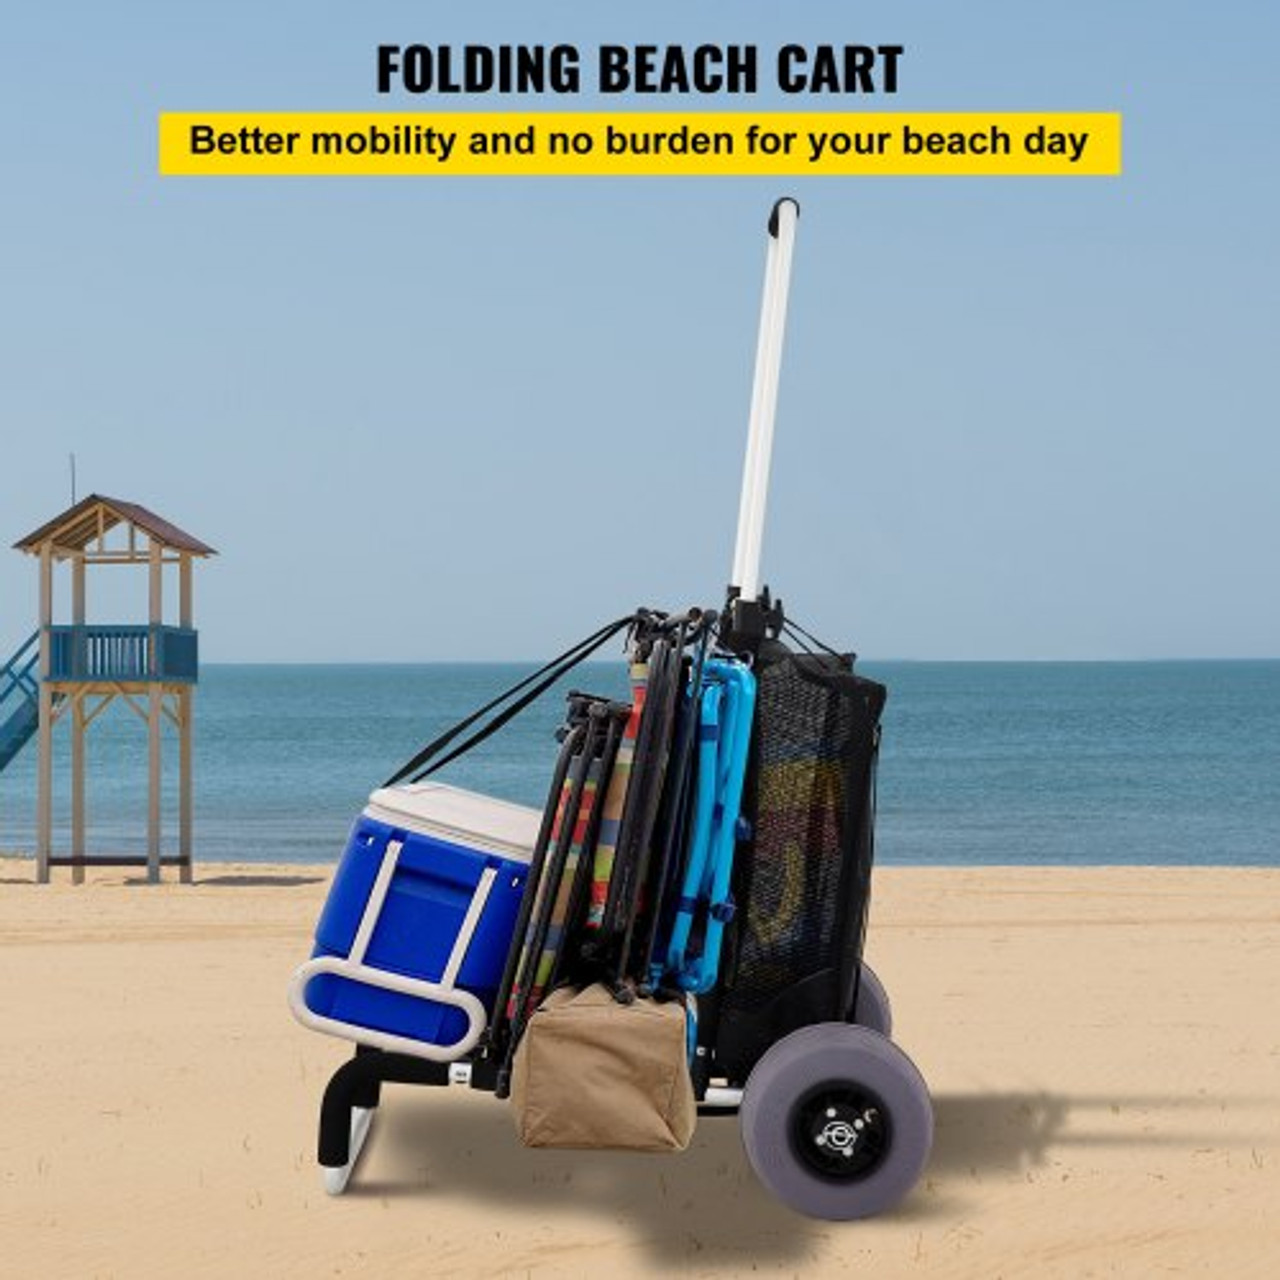 Beach Carts for Sand, w/ 10" PVC Balloon Wheels, 15" x 15" Cargo Deck, 165LBS Loading Capacity Folding Sand Cart & 31.1" to 49.6" Adjustable Height, Aluminum Cart for Picnic, Fishing, Beach